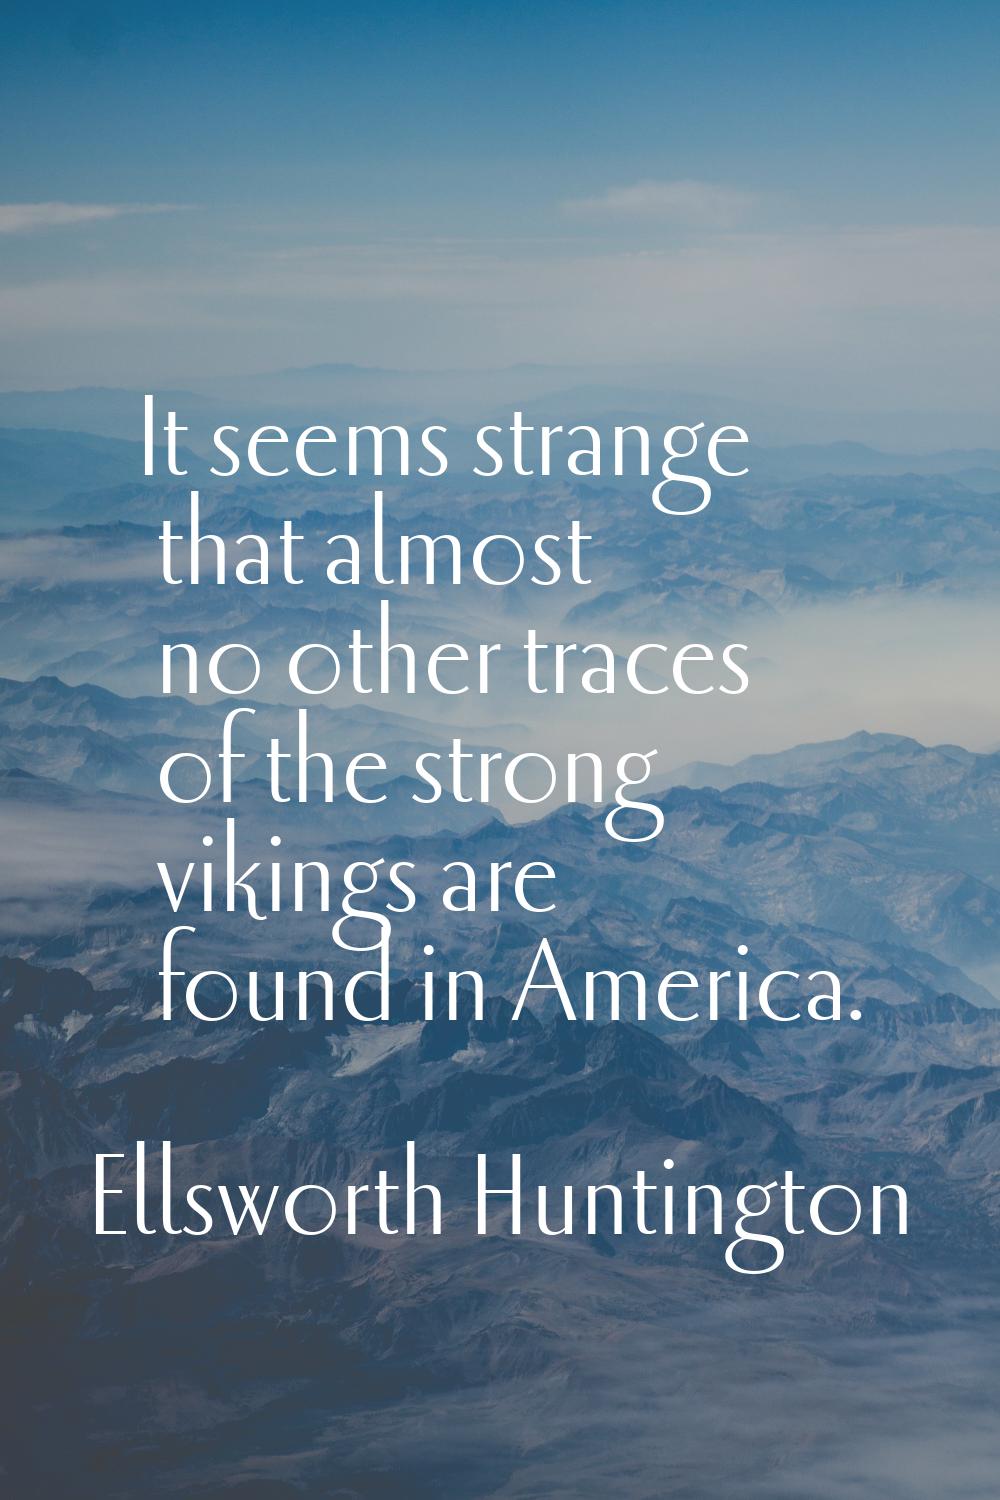 It seems strange that almost no other traces of the strong vikings are found in America.